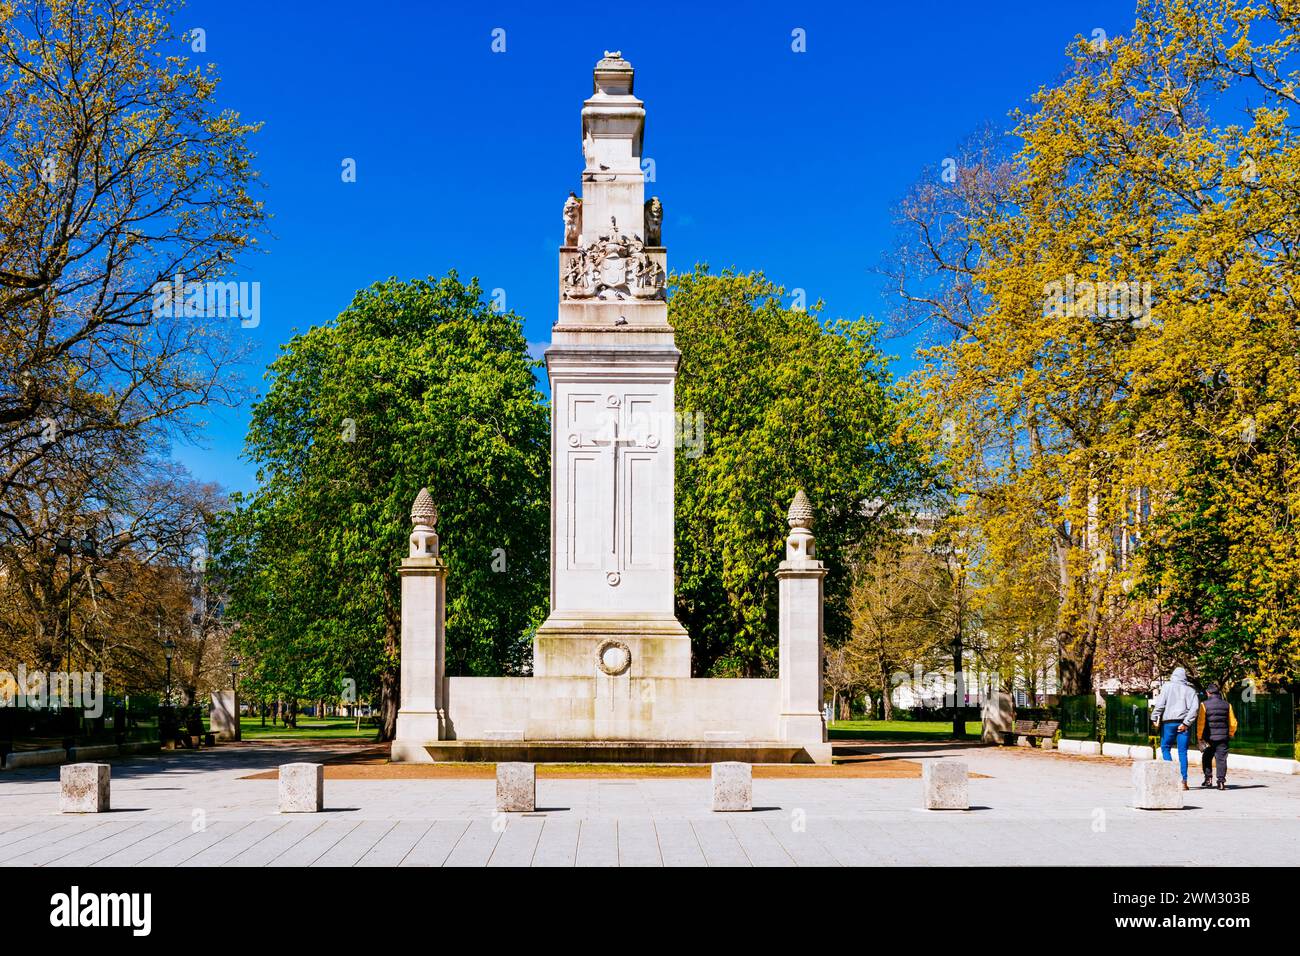 The Southampton Cenotaph is a stone memorial at Watts Park in Southampton, England, originally dedicated to the casualties of the First World War. Sou Stock Photo